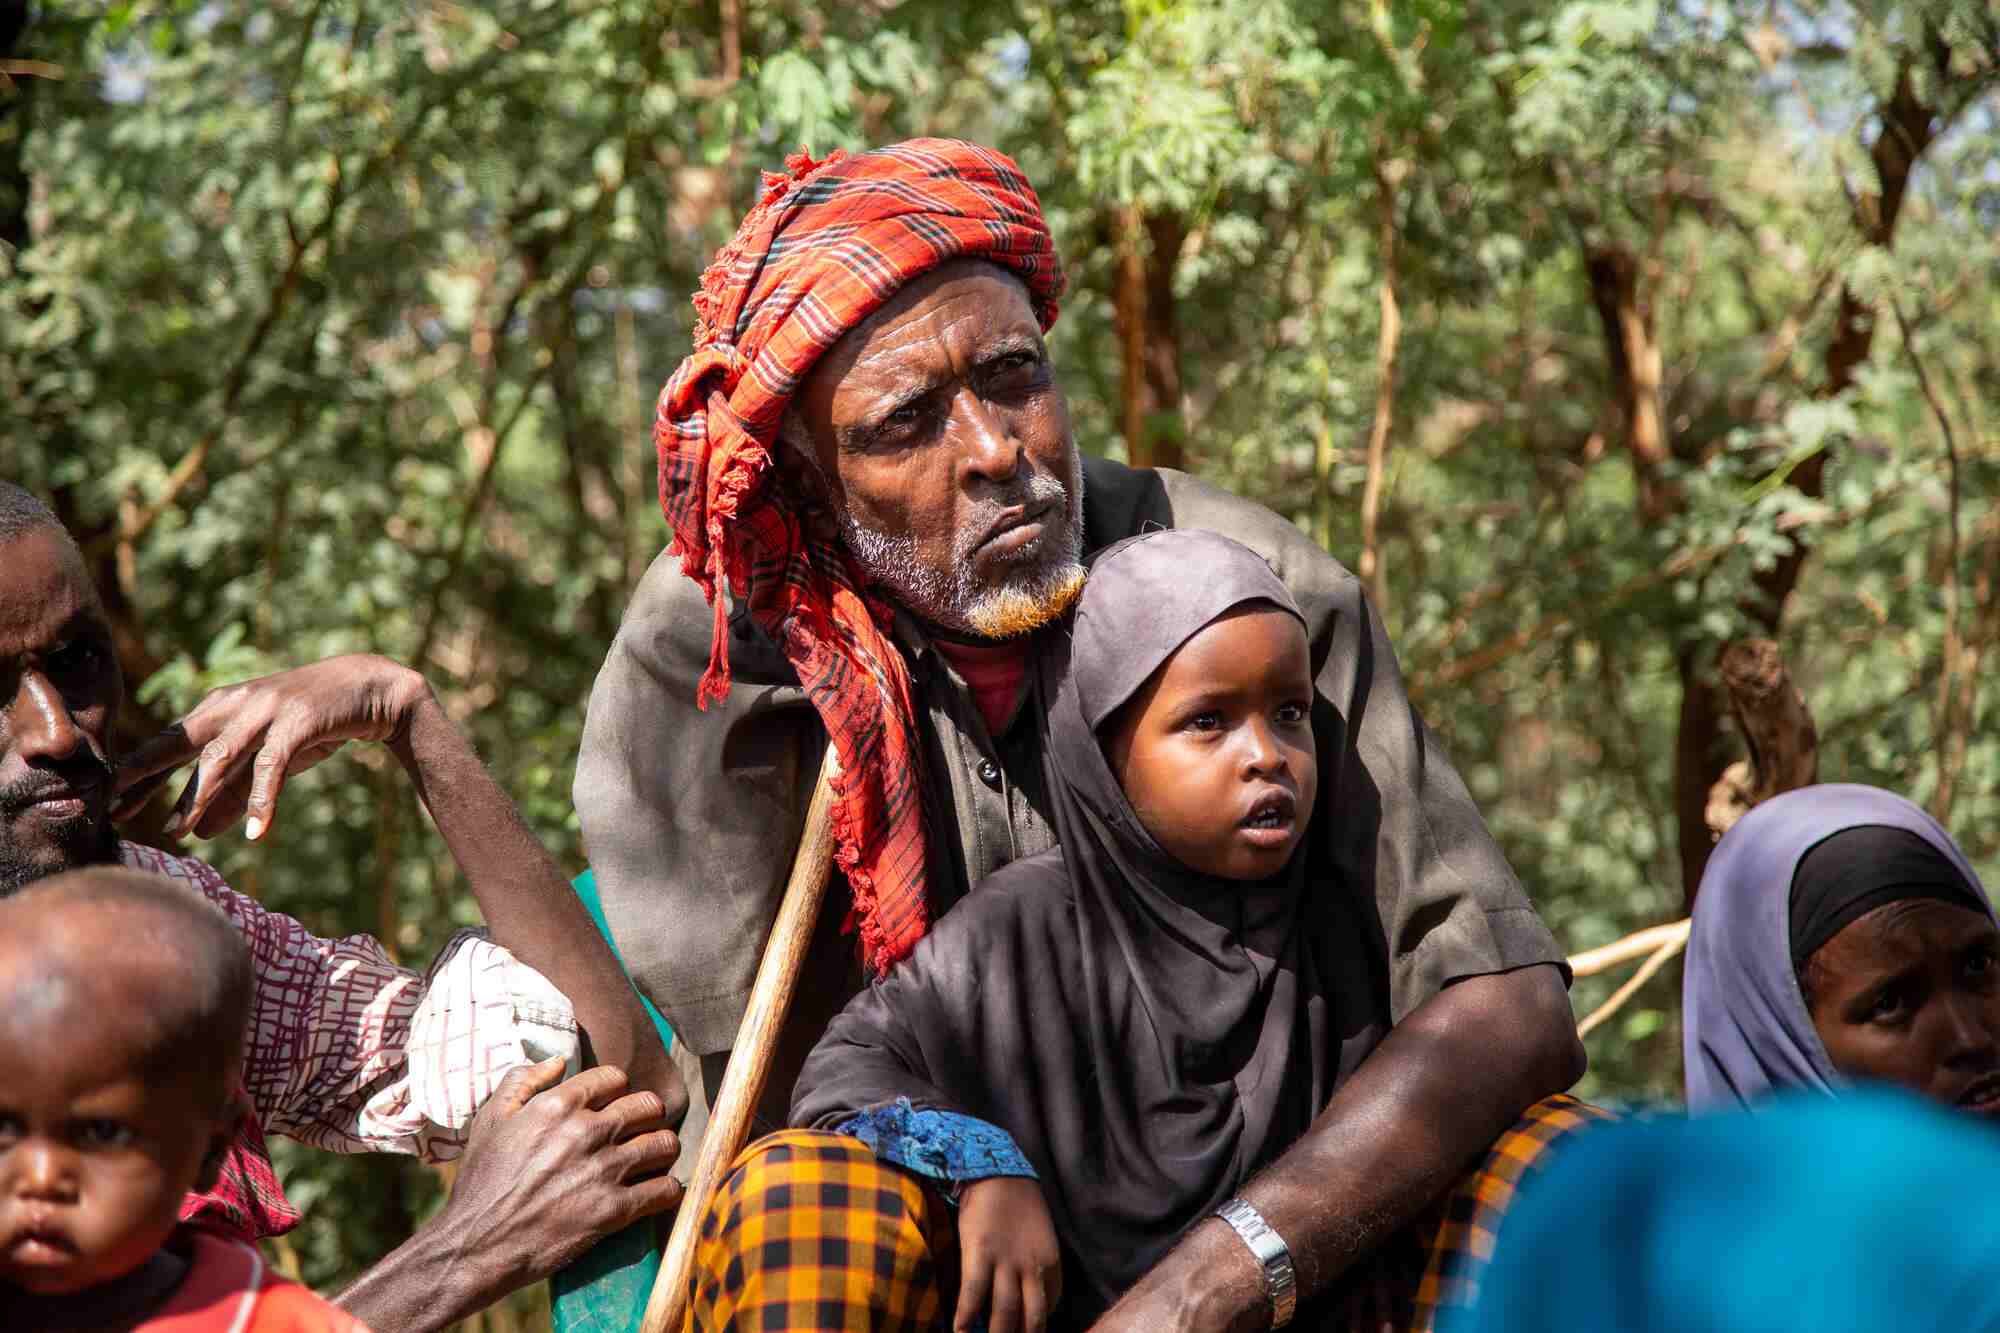 In an Internally Displaced Persons camp in Somalia, a man sits within a group of people with a toddler on his lap. 